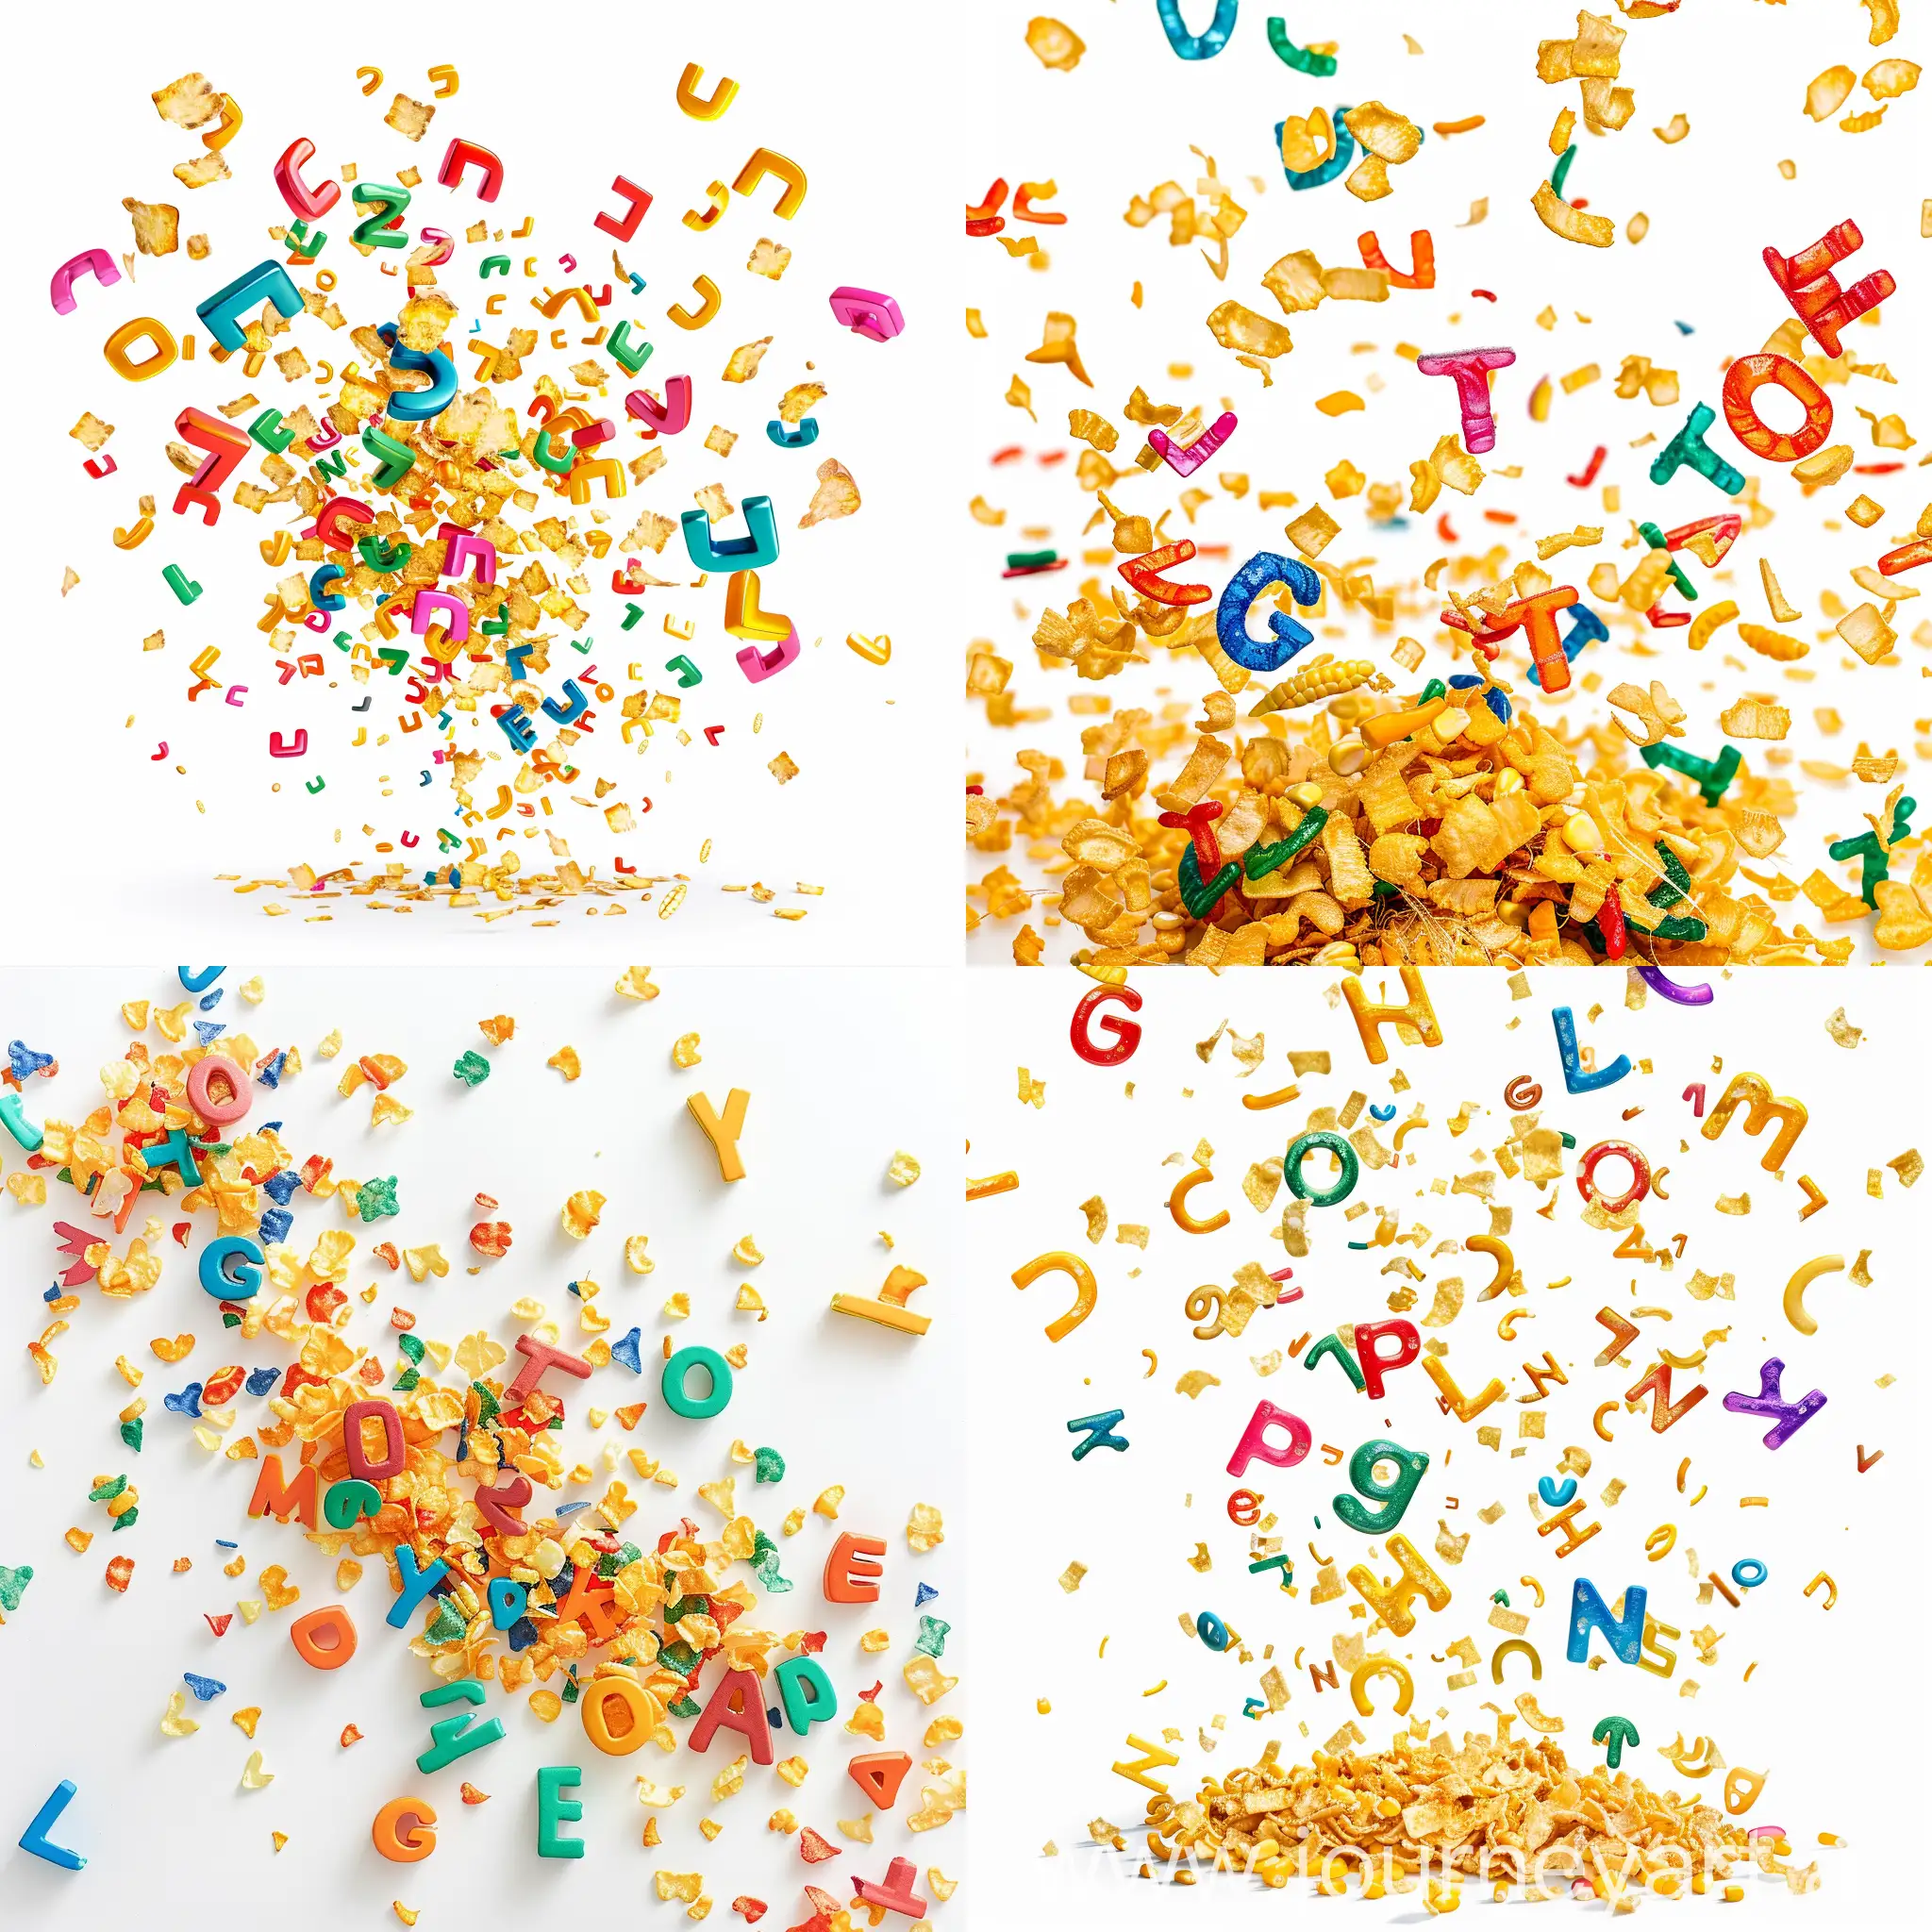 Colorful-Flying-Corn-Flakes-Letters-on-White-Background